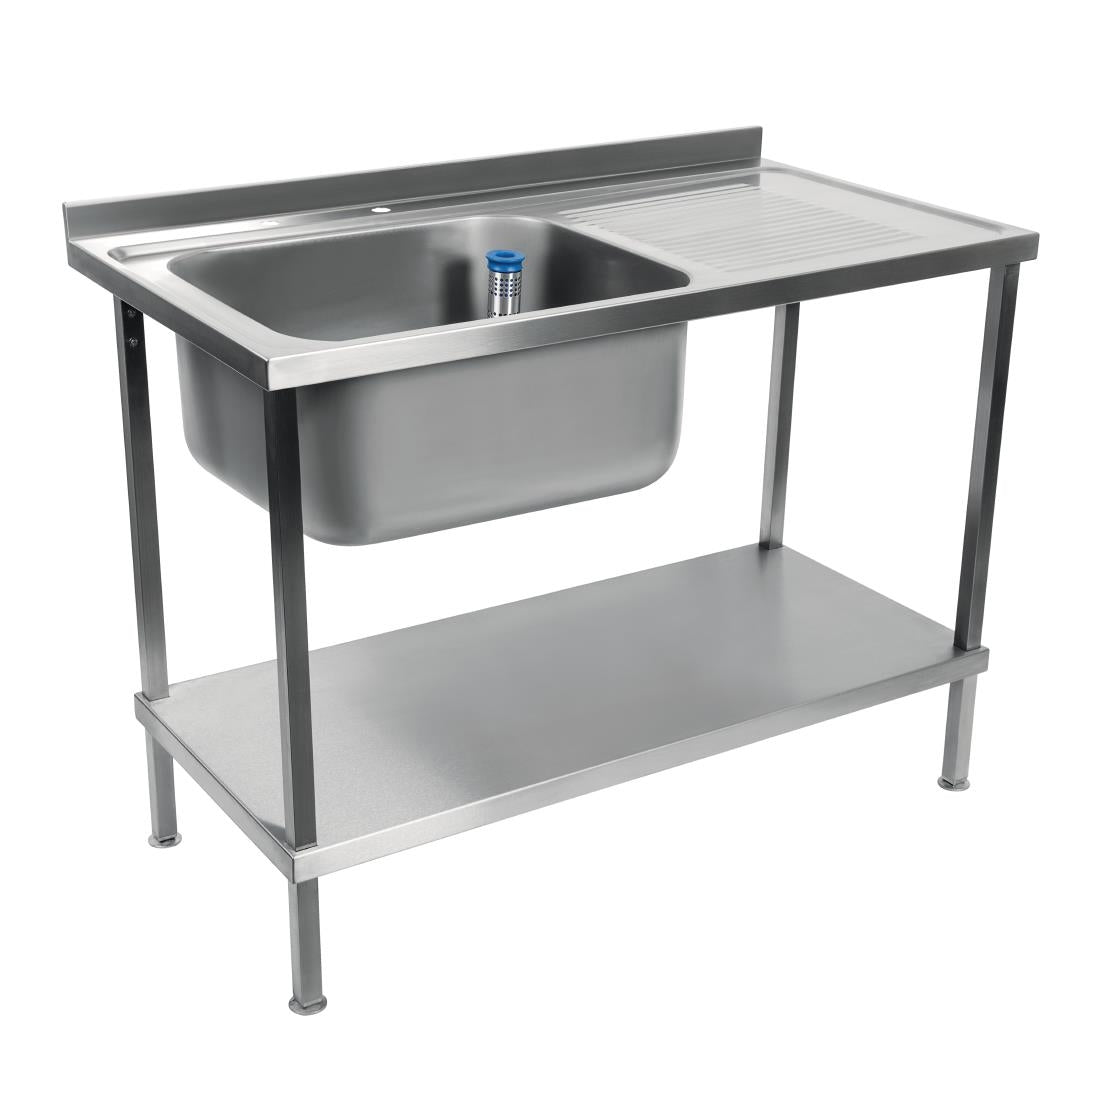 DR388 Holmes Fully Assembled Stainless Steel Sink Right Hand Drainer 1200mm JD Catering Equipment Solutions Ltd